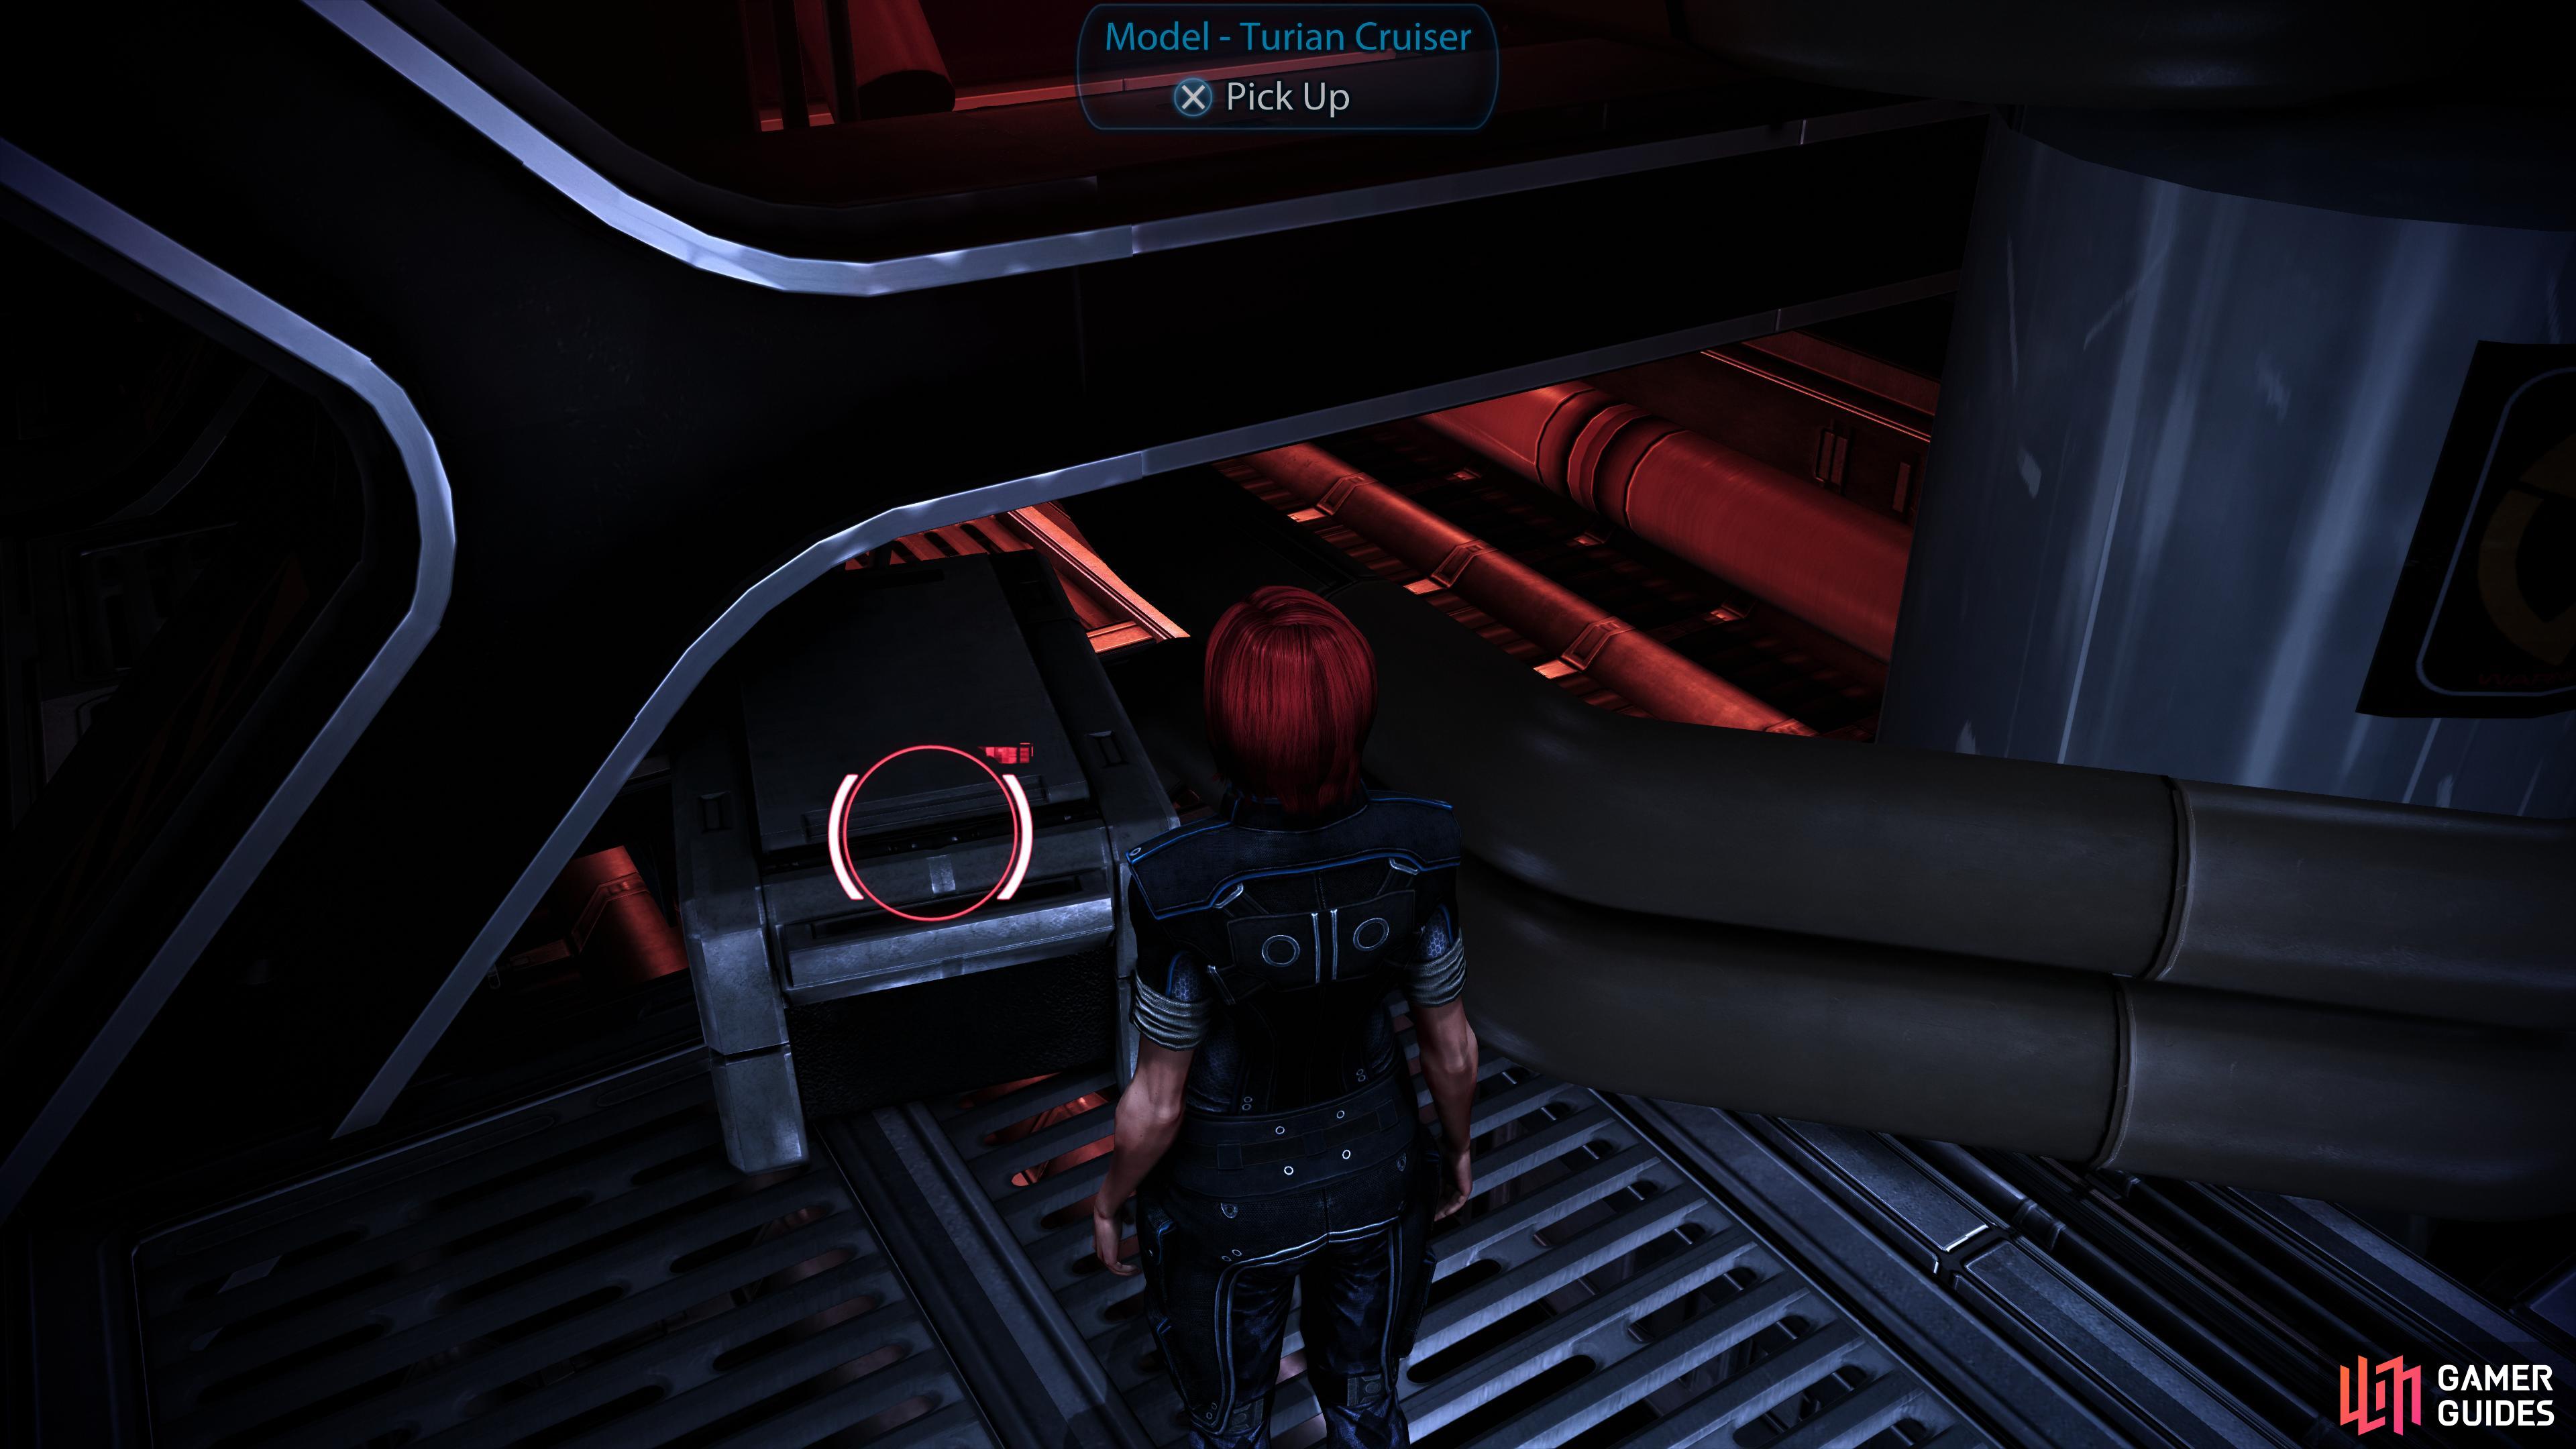 In the Engineering bay you'll find the Model - Turian Crusier,